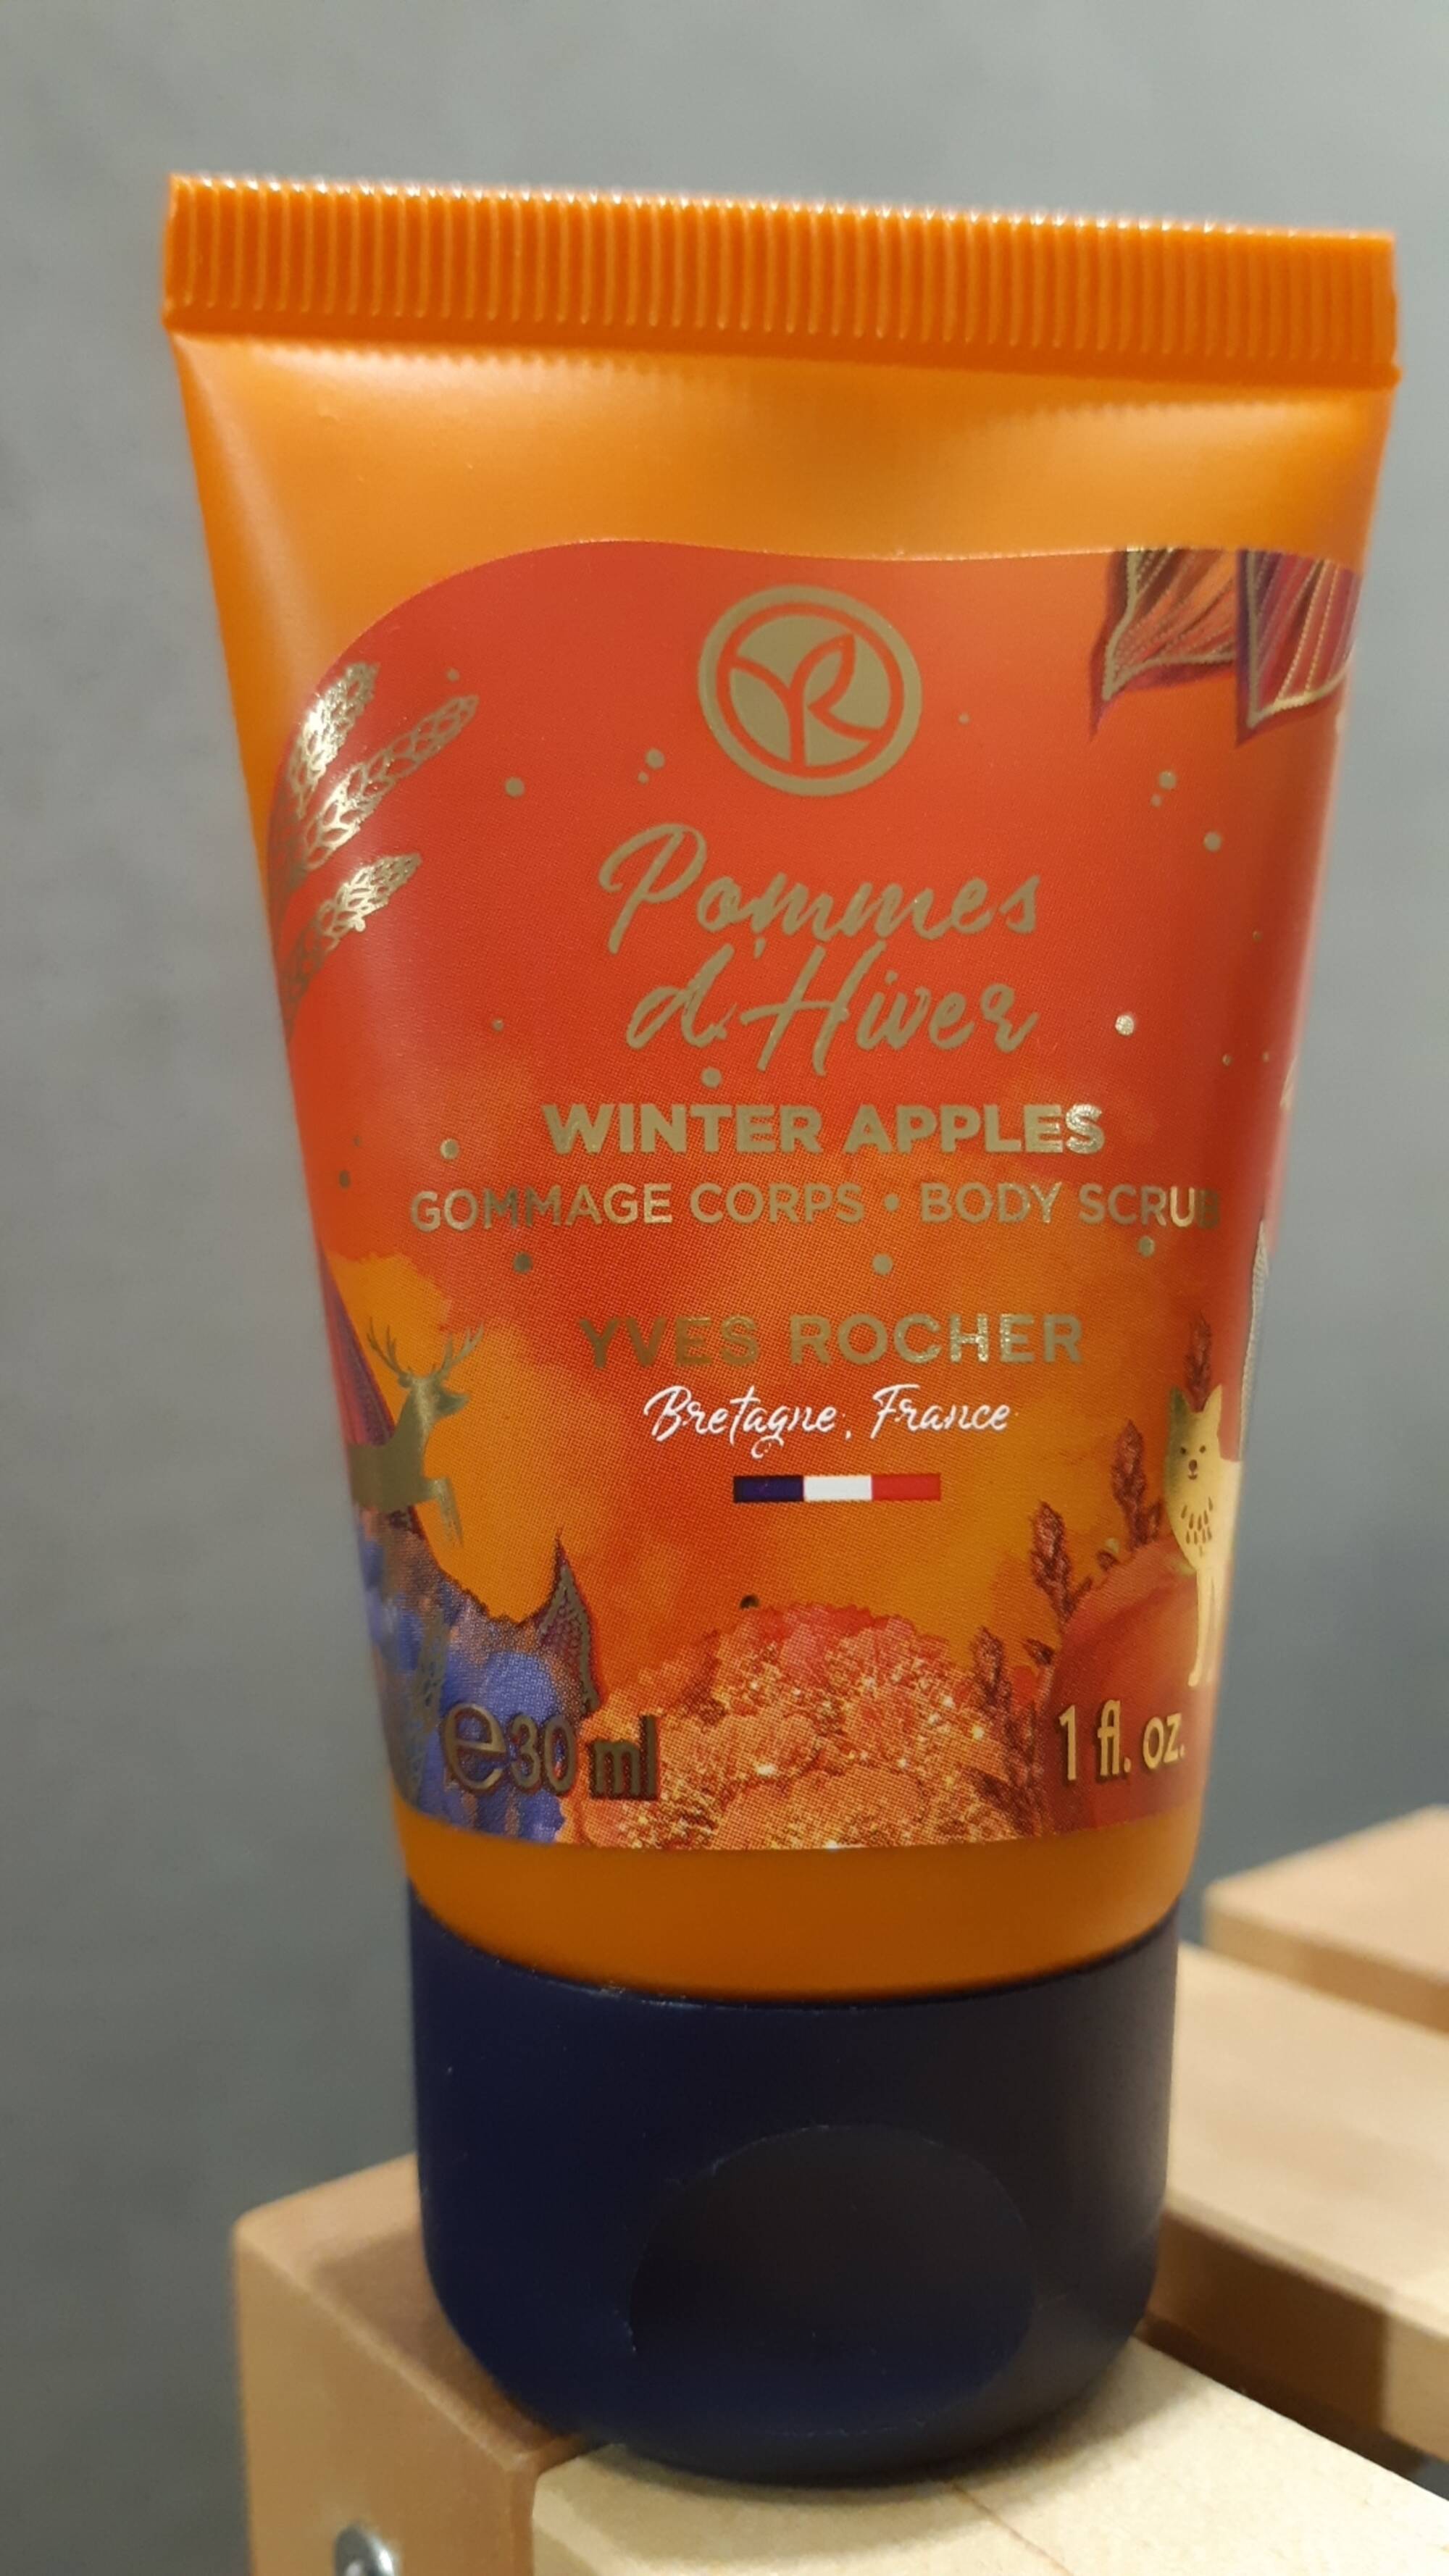 YVES ROCHER - Pommes d'hiver - Gommage corps